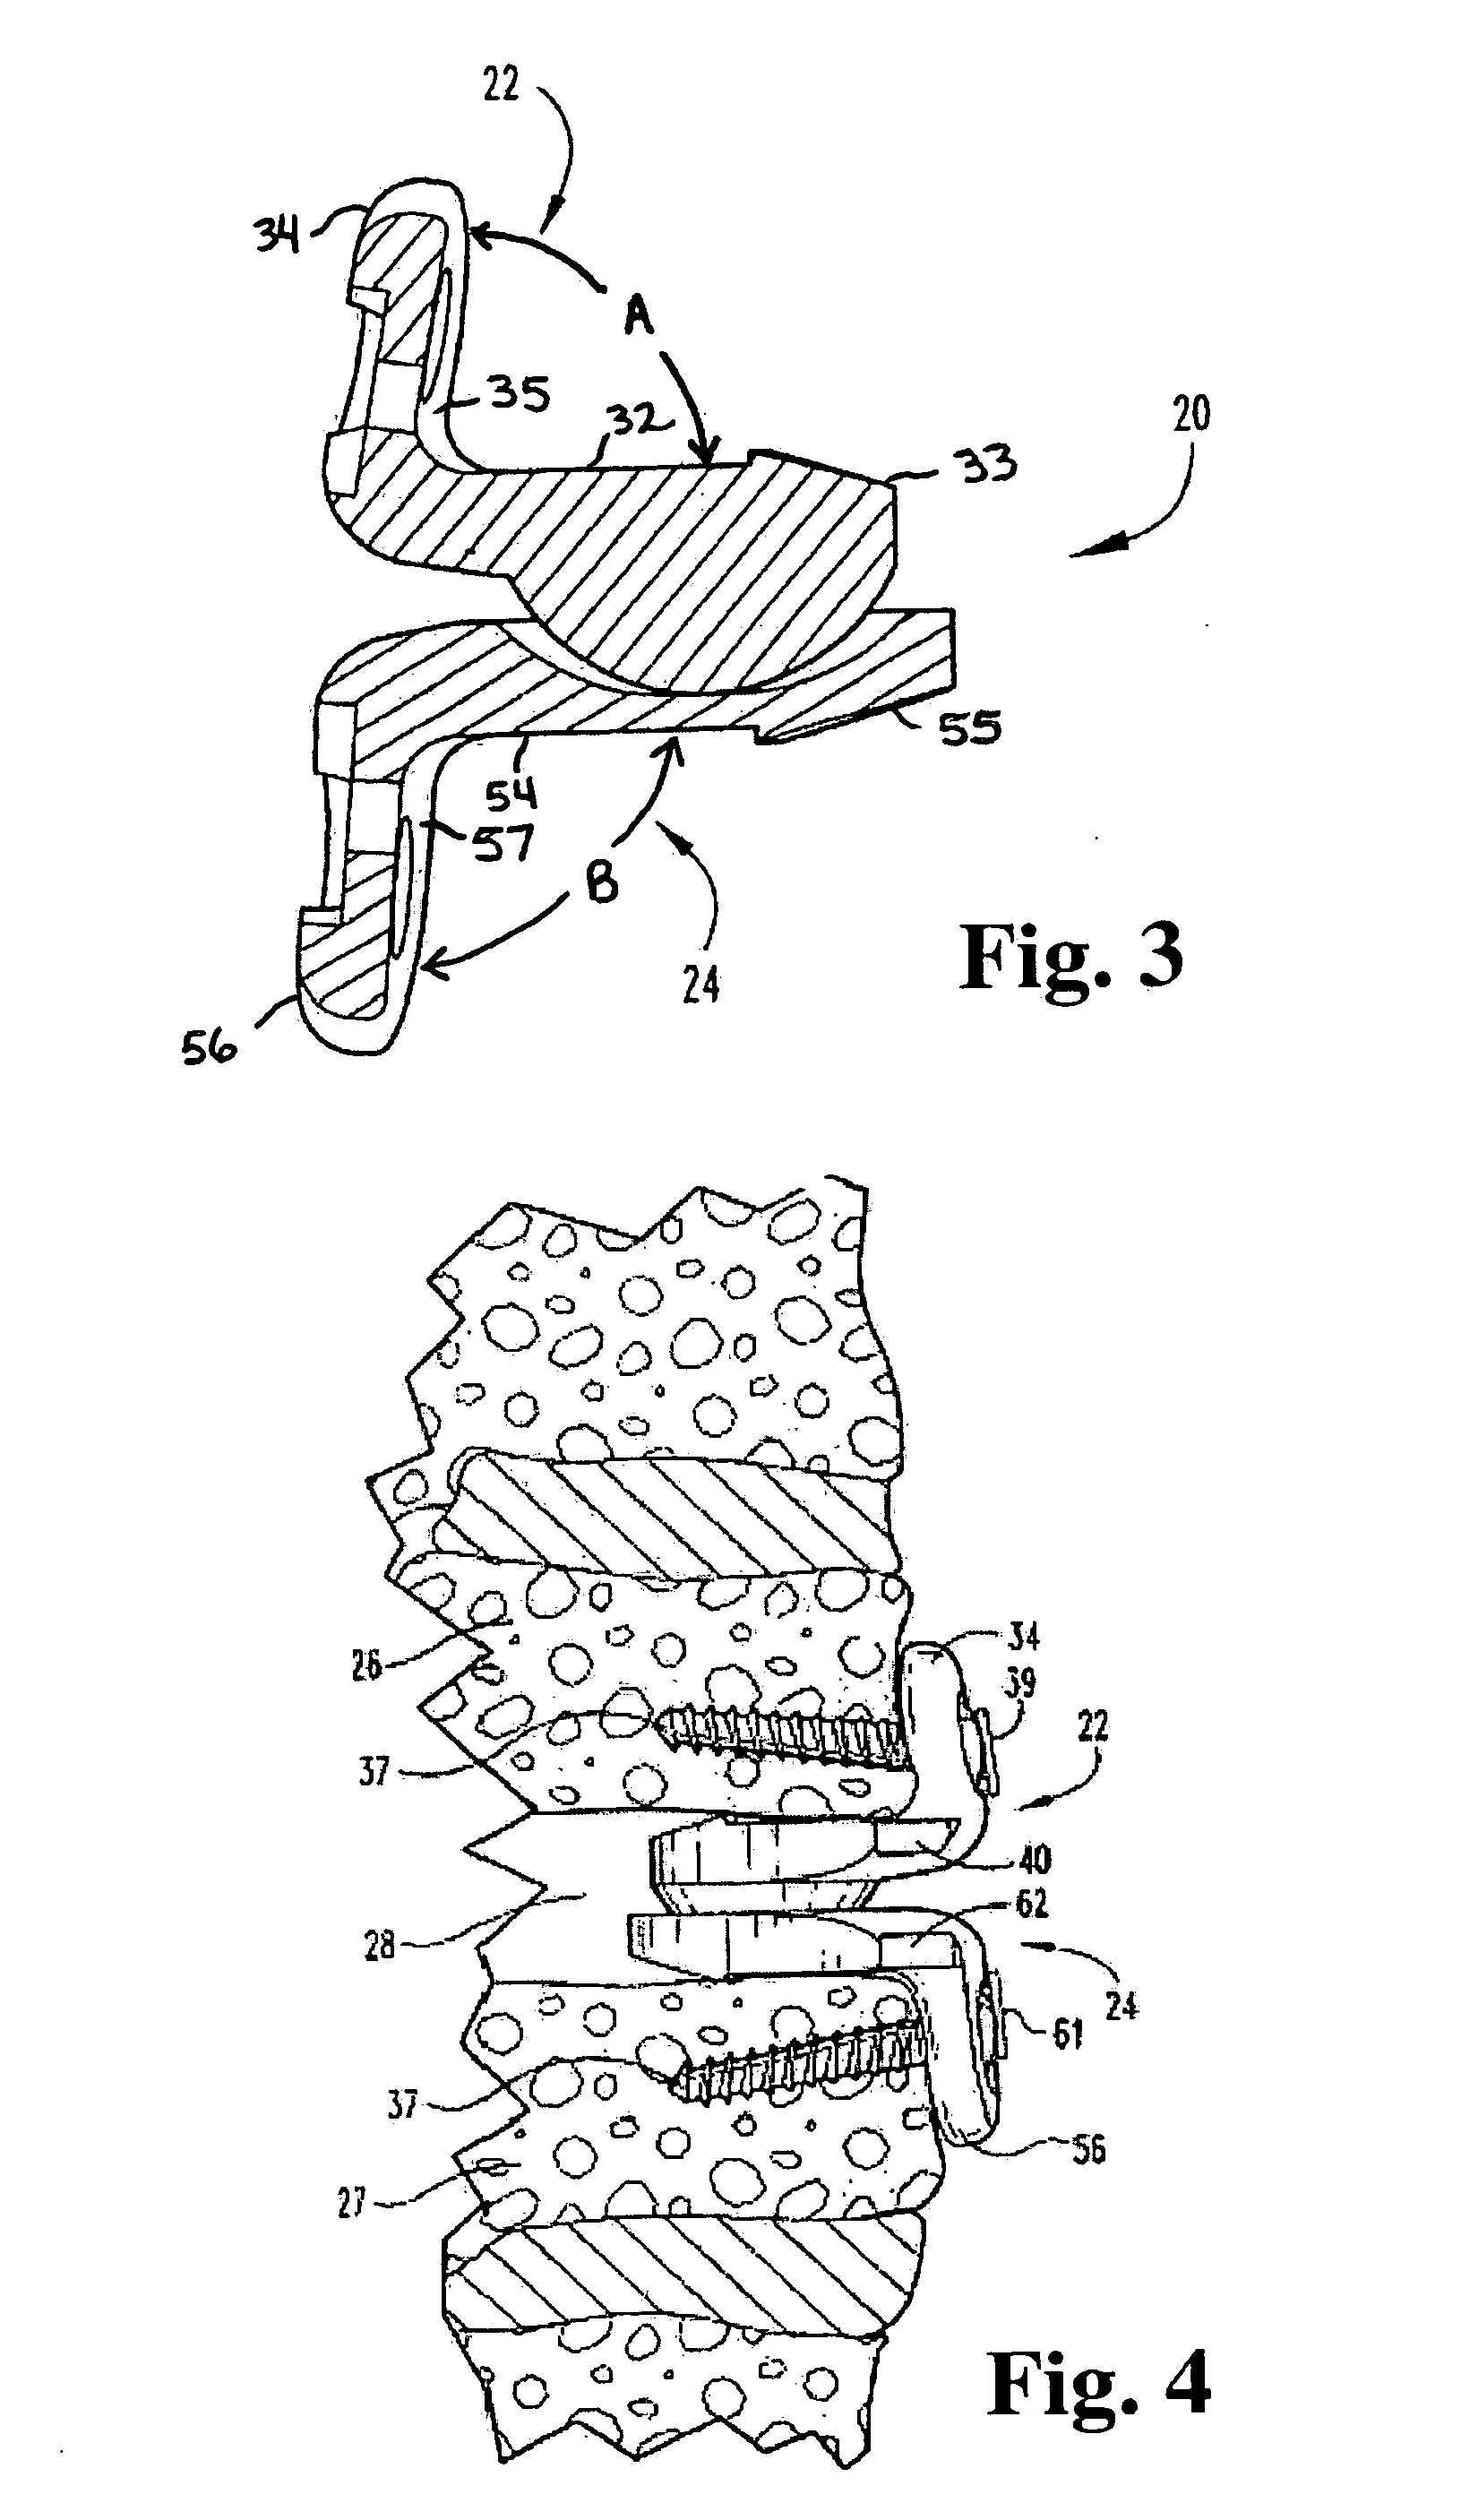 Articulating spinal disc implants with amorphous metal elements